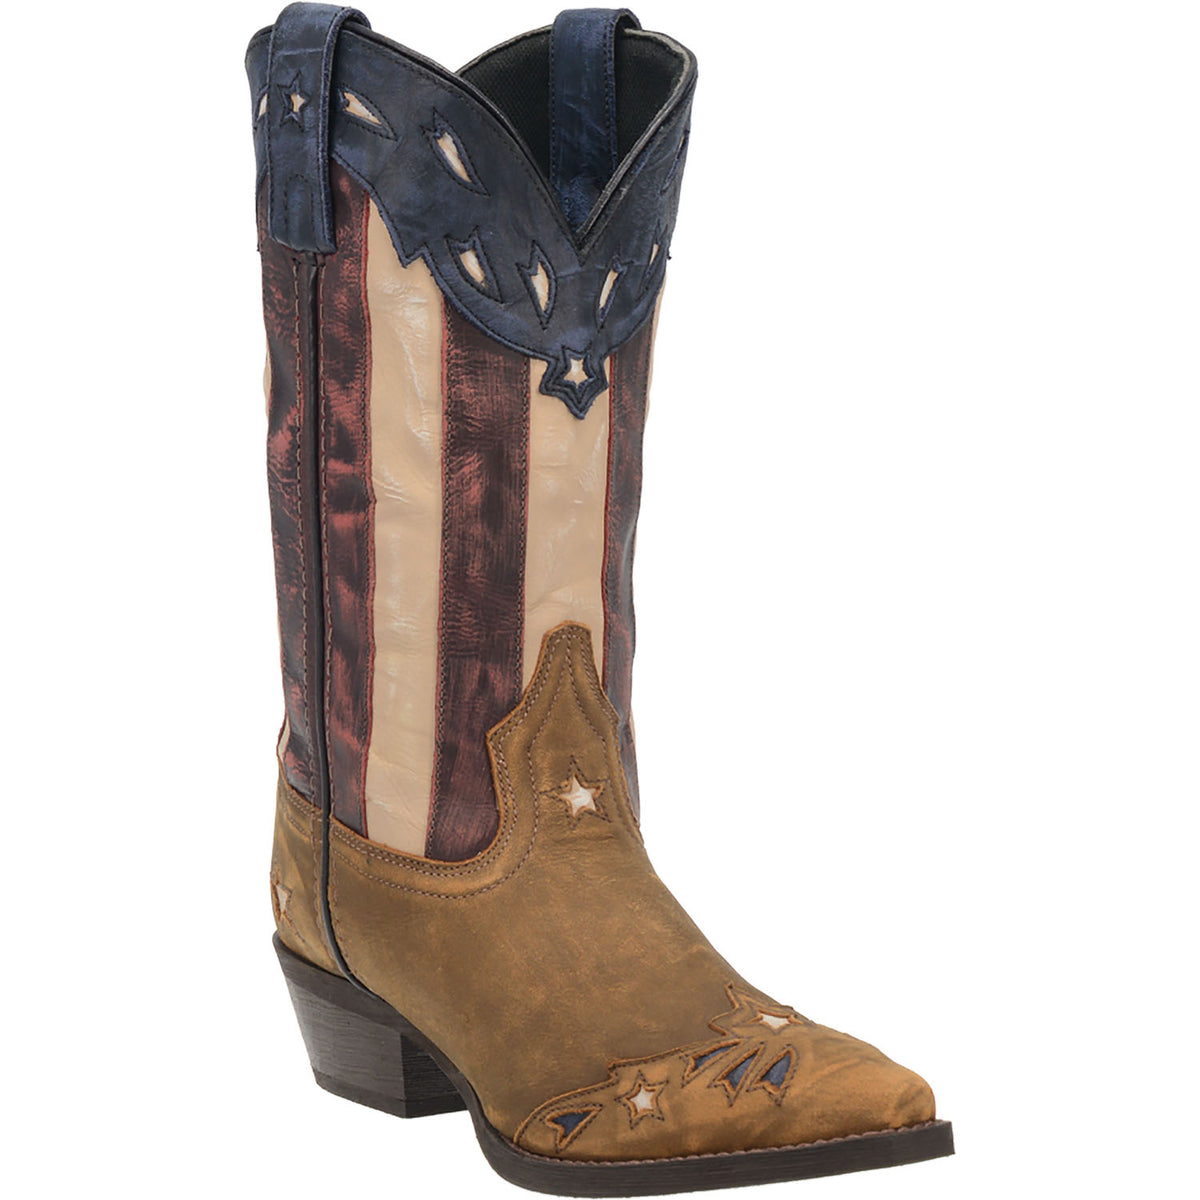 KEYES STARS AND STRIPES LEATHER BOOT Cover